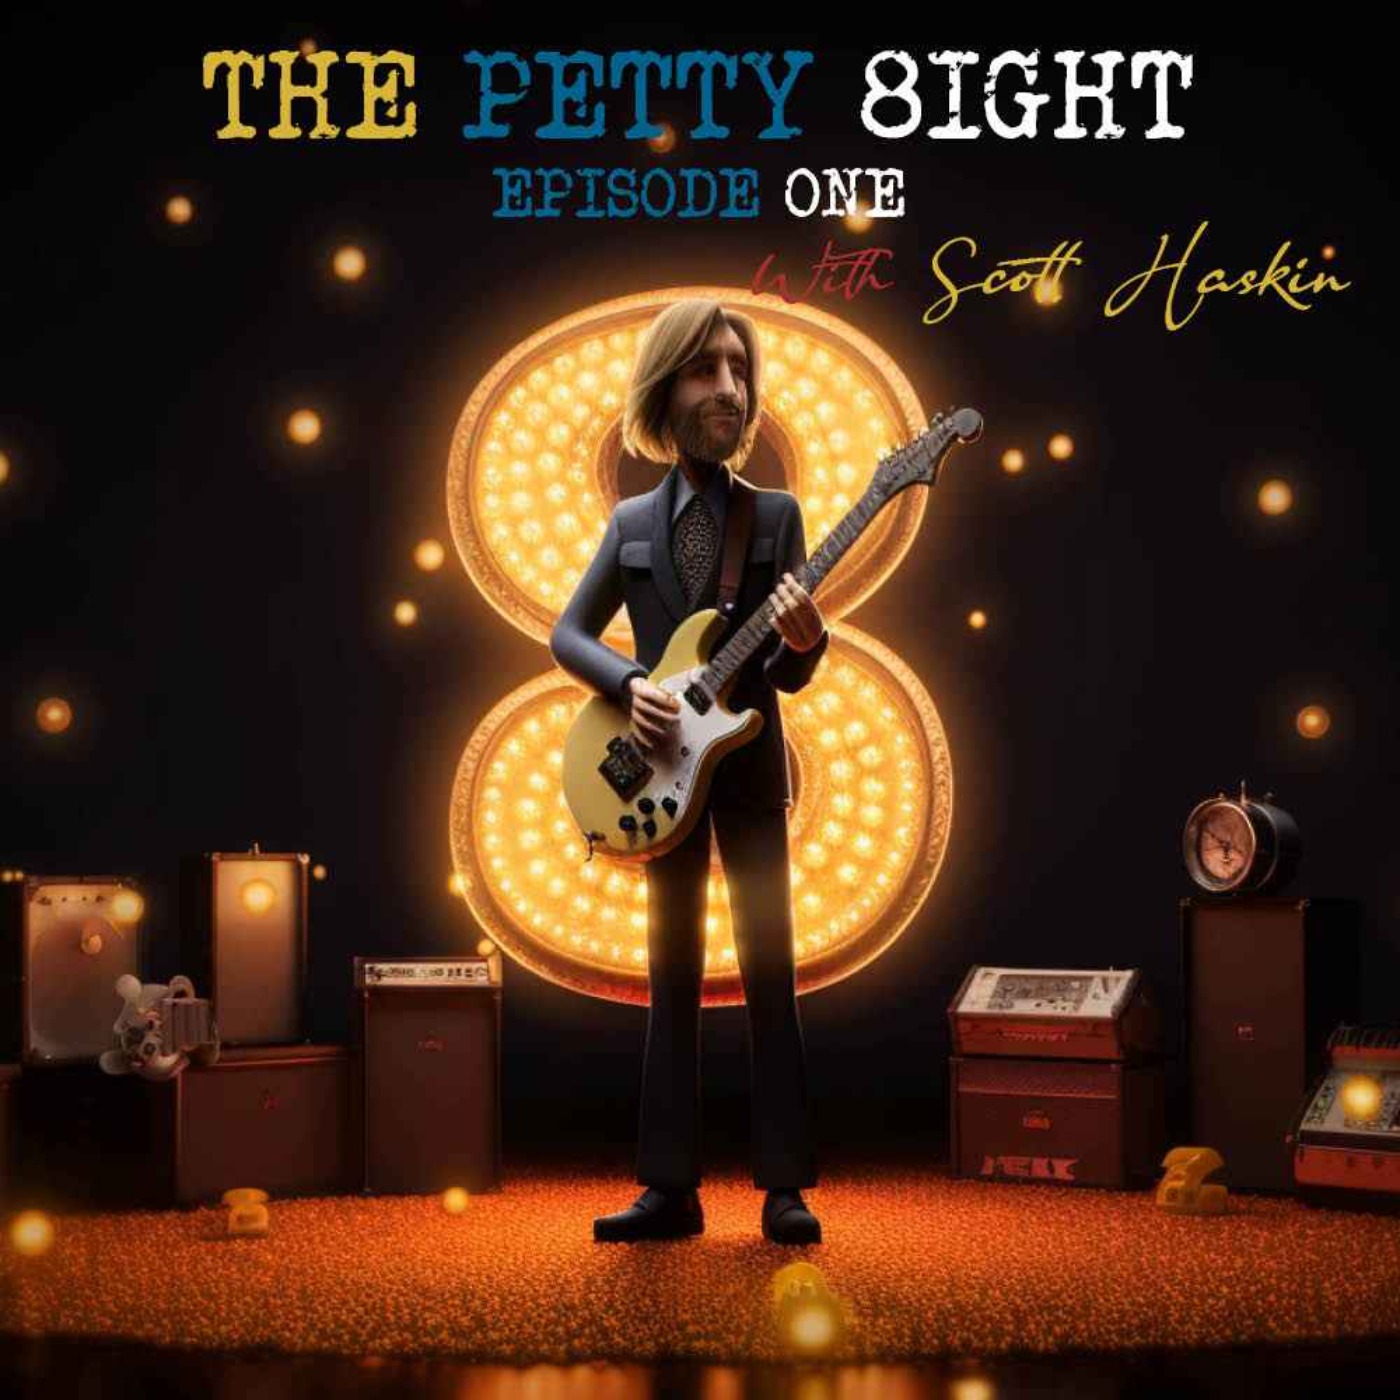 cover art for The Petty 8ight with Scott Haskin